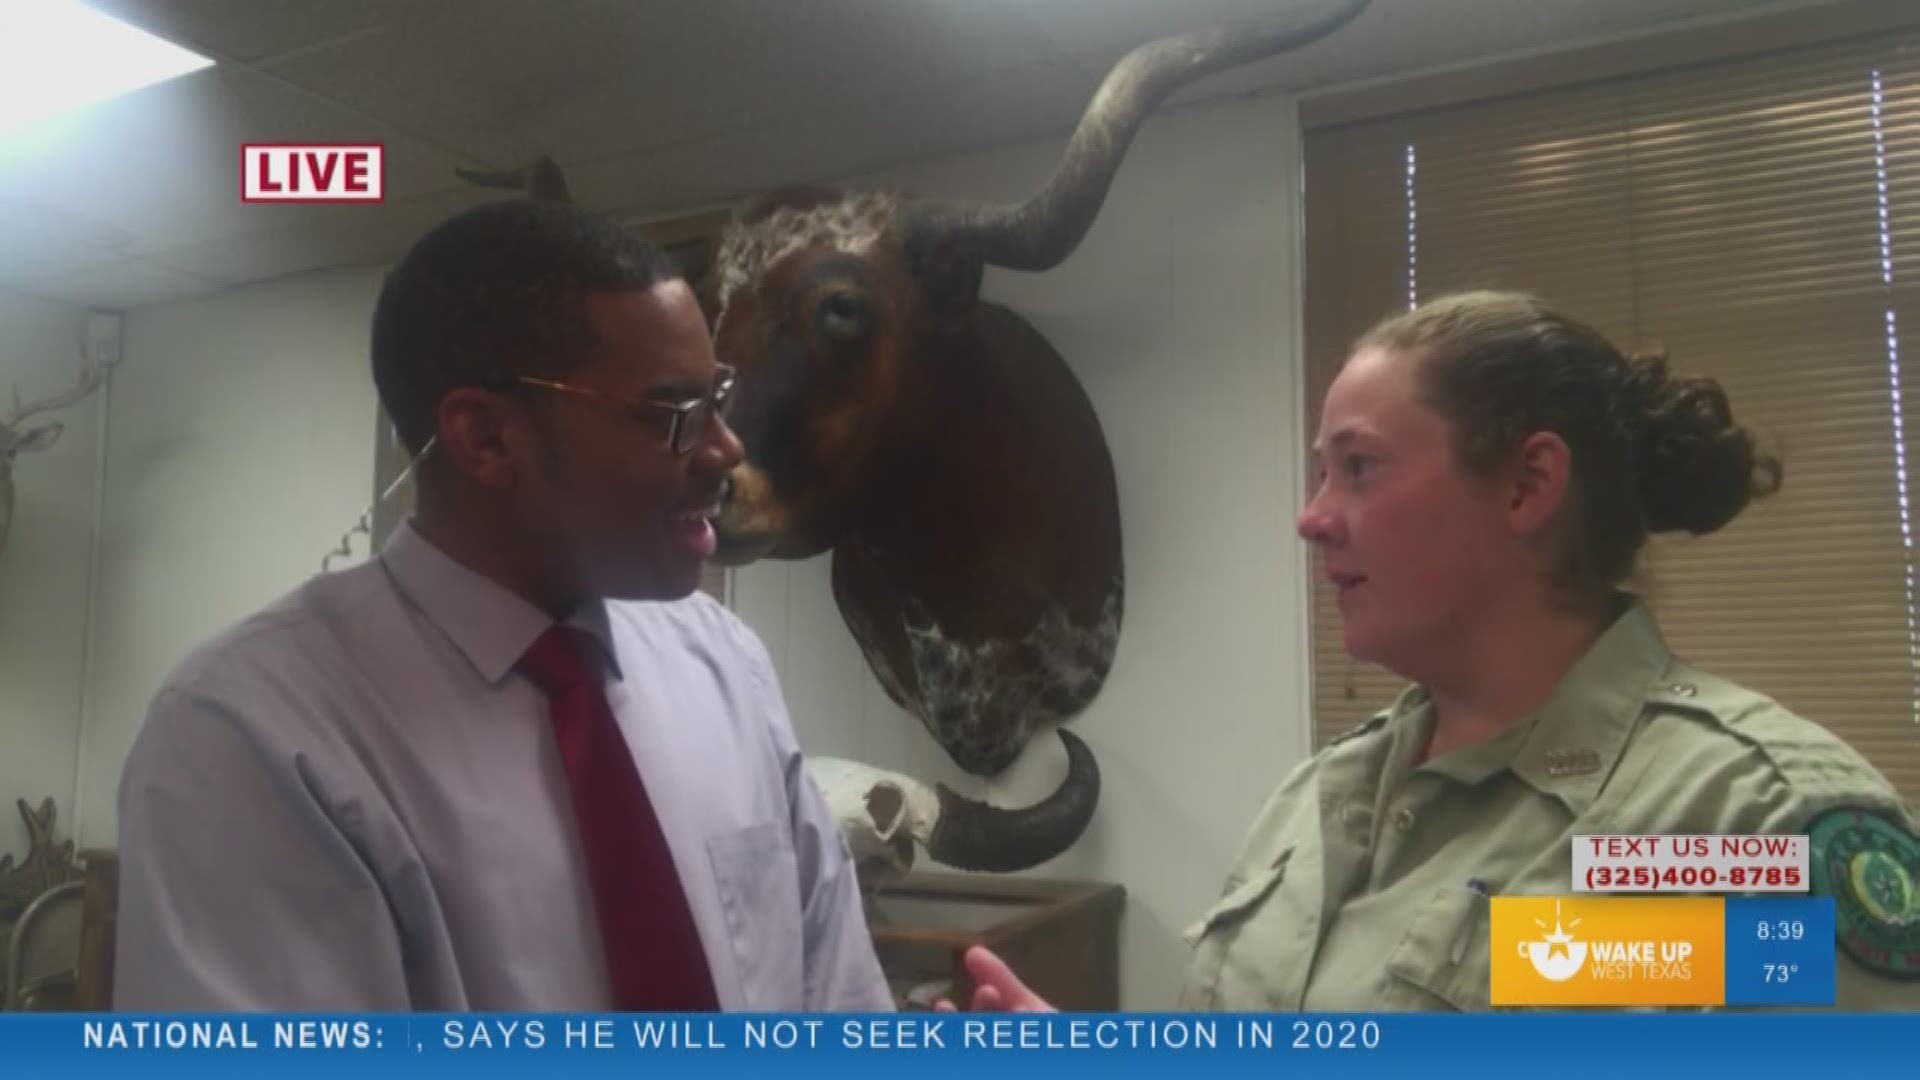 Our Malik Mingo spoke with one of the operations interpreters at the San Angelo State Park about two upcoming events: one to celebrate Smokey the Bear's birthday and another about a new program that the park will be starting.